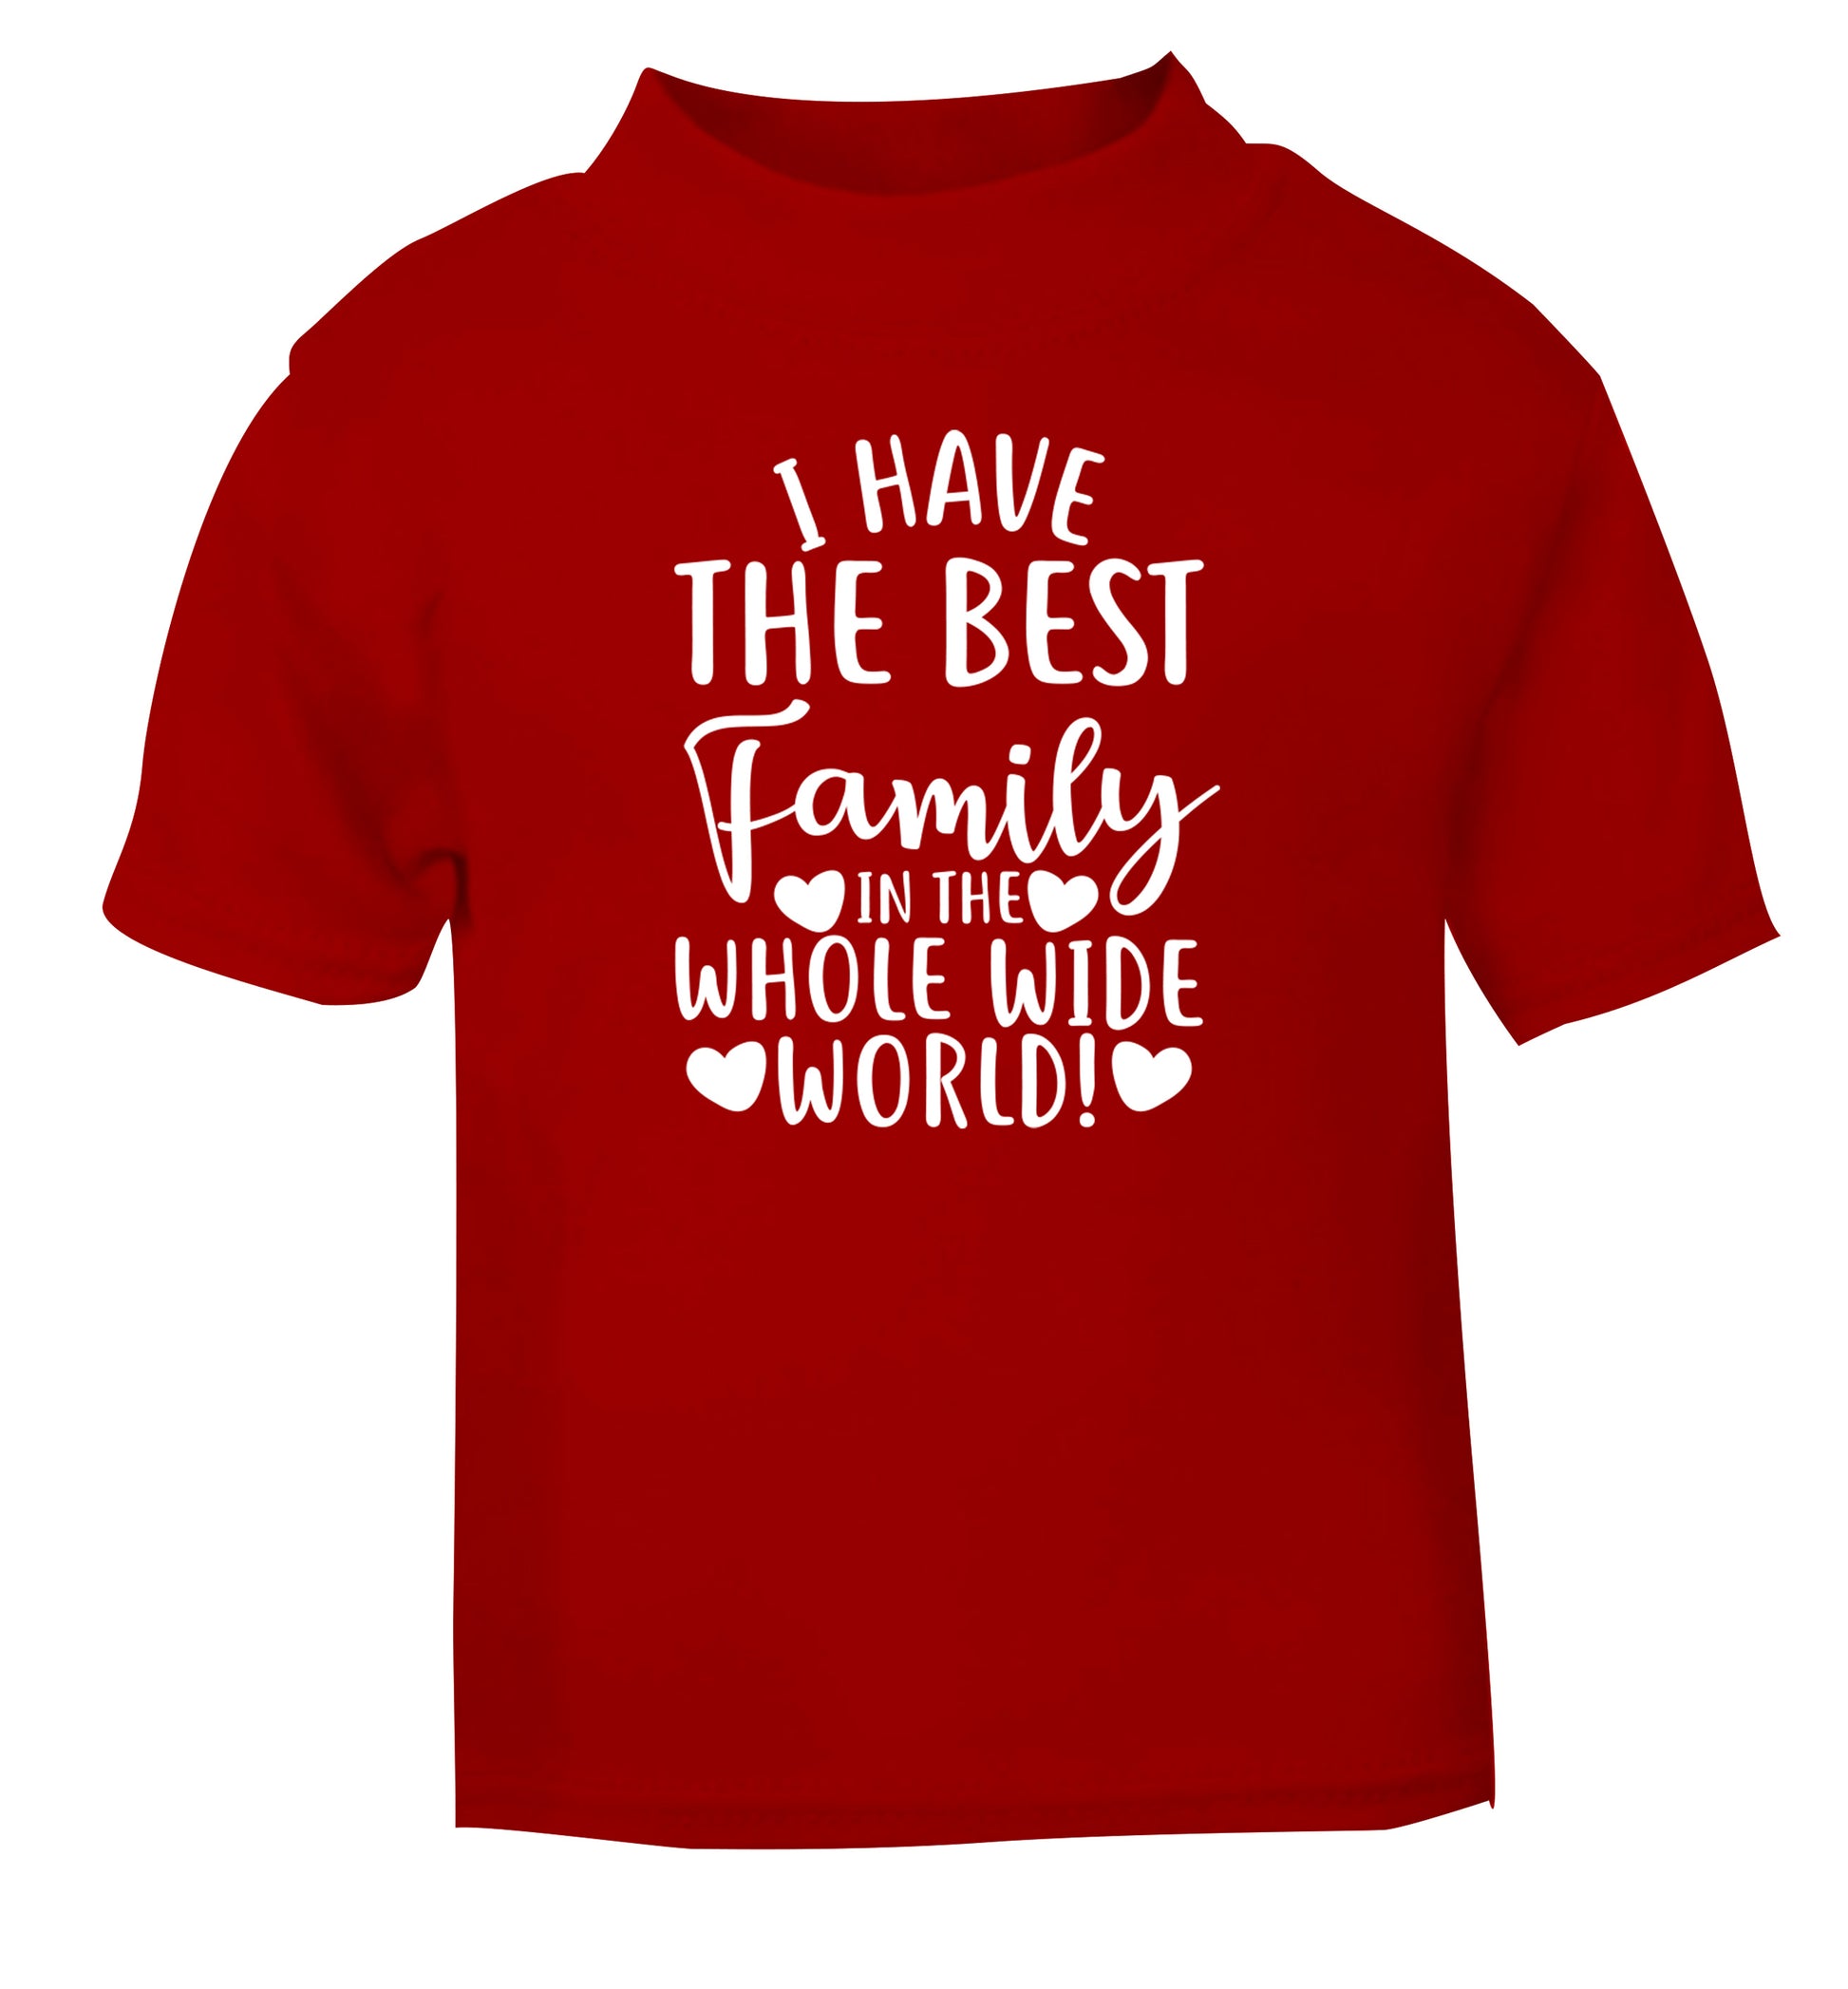 I have the best family in the whole wide world! red Baby Toddler Tshirt 2 Years